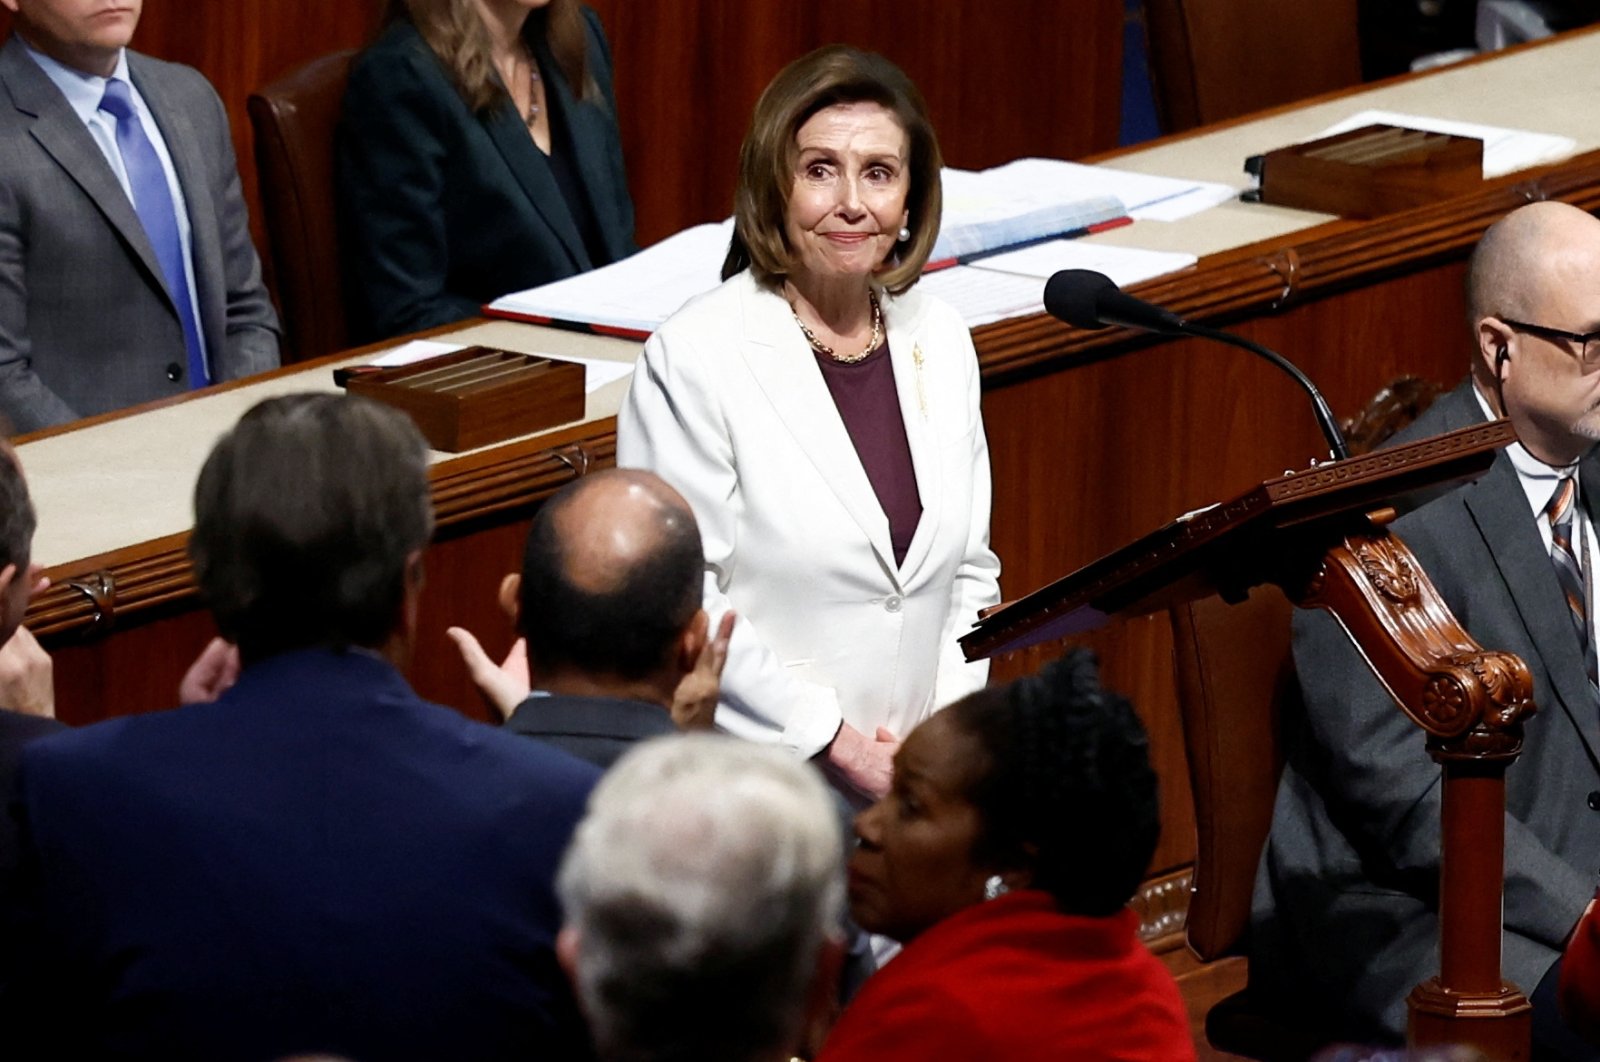 U.S. House Speaker Nancy Pelosi of California listens to applause from her House colleagues after she announced that she will remain in Congress but will not run for re-election as Speaker of the House, at the Capitol in Washington, U.S., Nov. 17, 2022. (Reuters Photo)